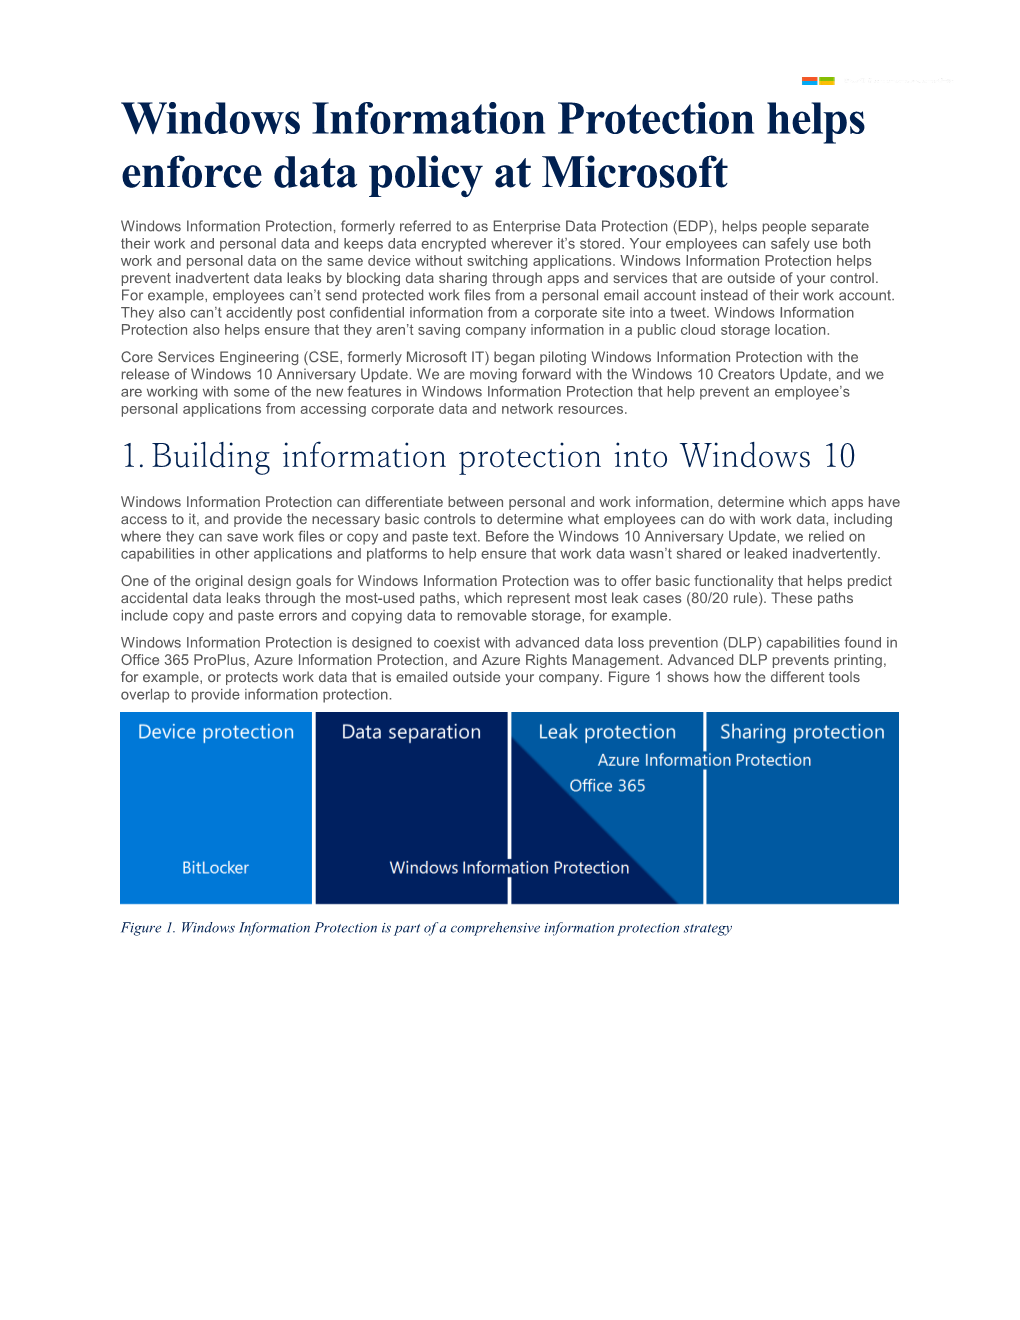 Windows Information Protection Helps Enforce Data Policy at Microsoft